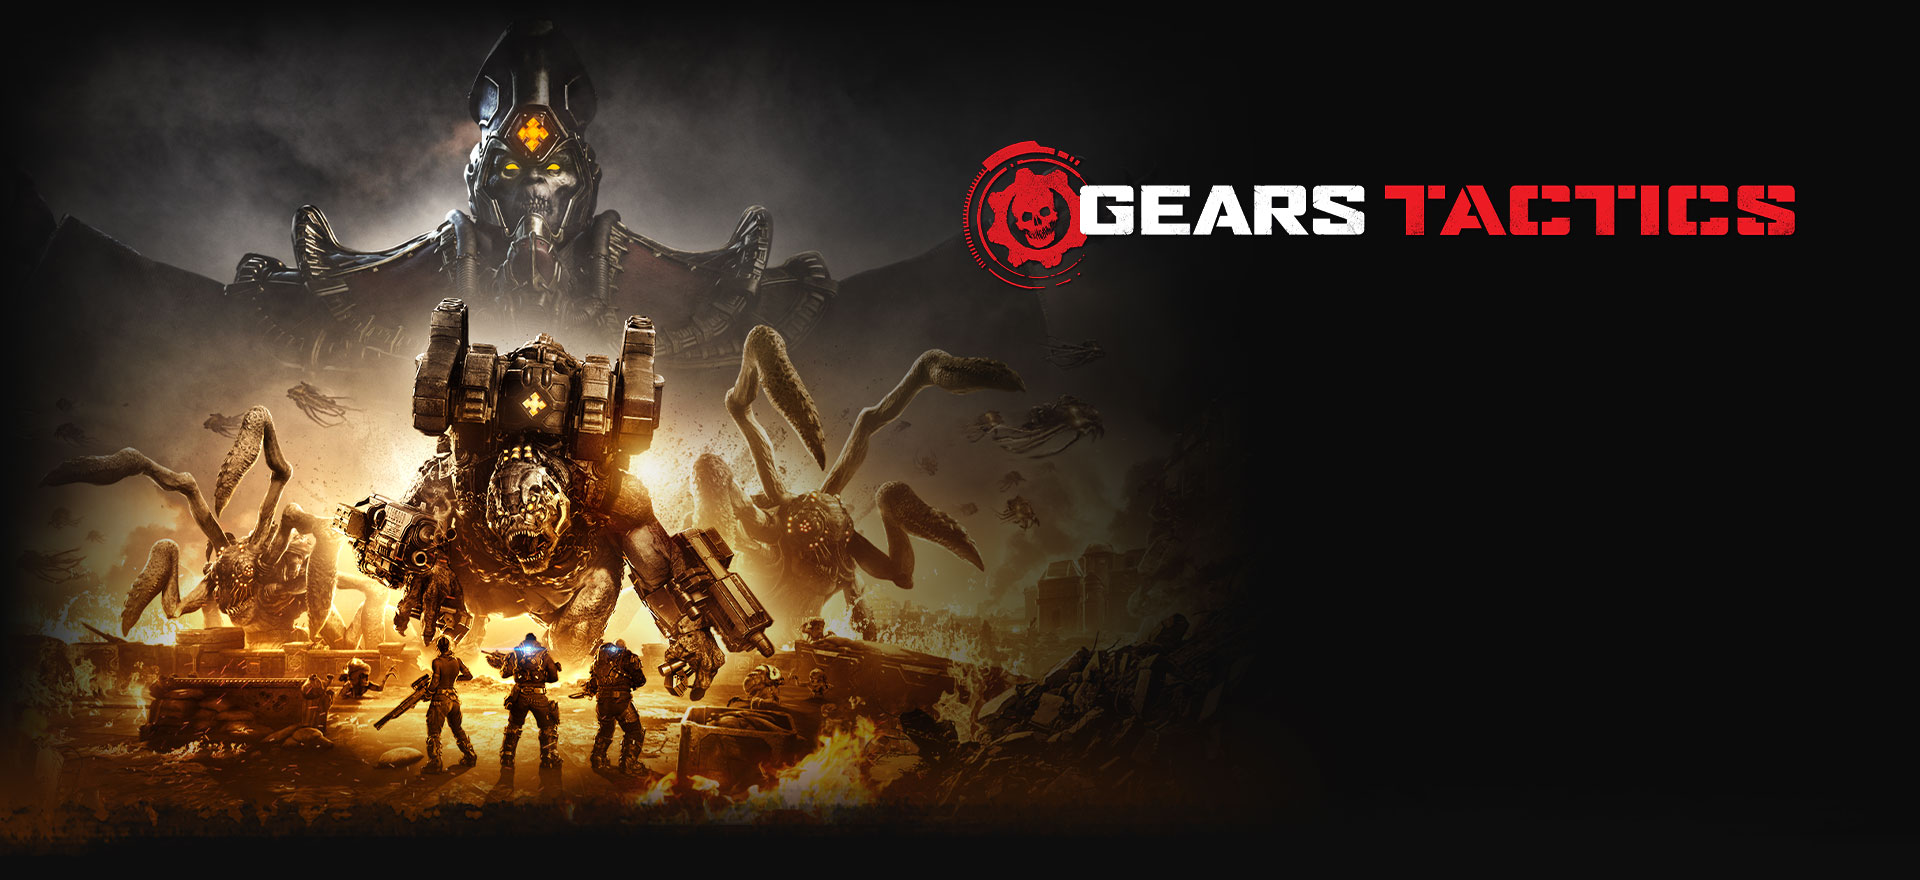 gears of war 4 xbox marketplace